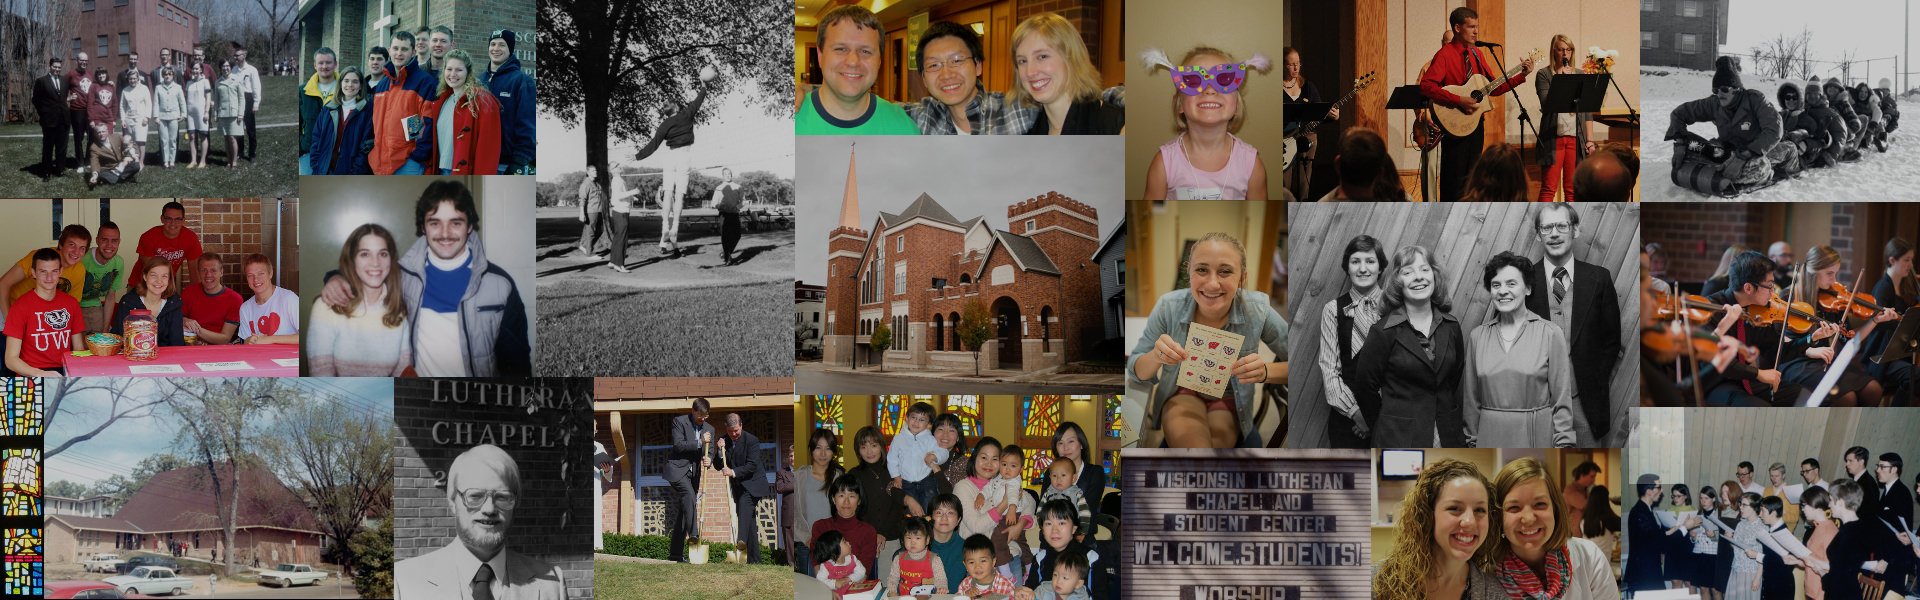 A collage of photos from Wisconsin Lutheran Chapel's ministry over the years